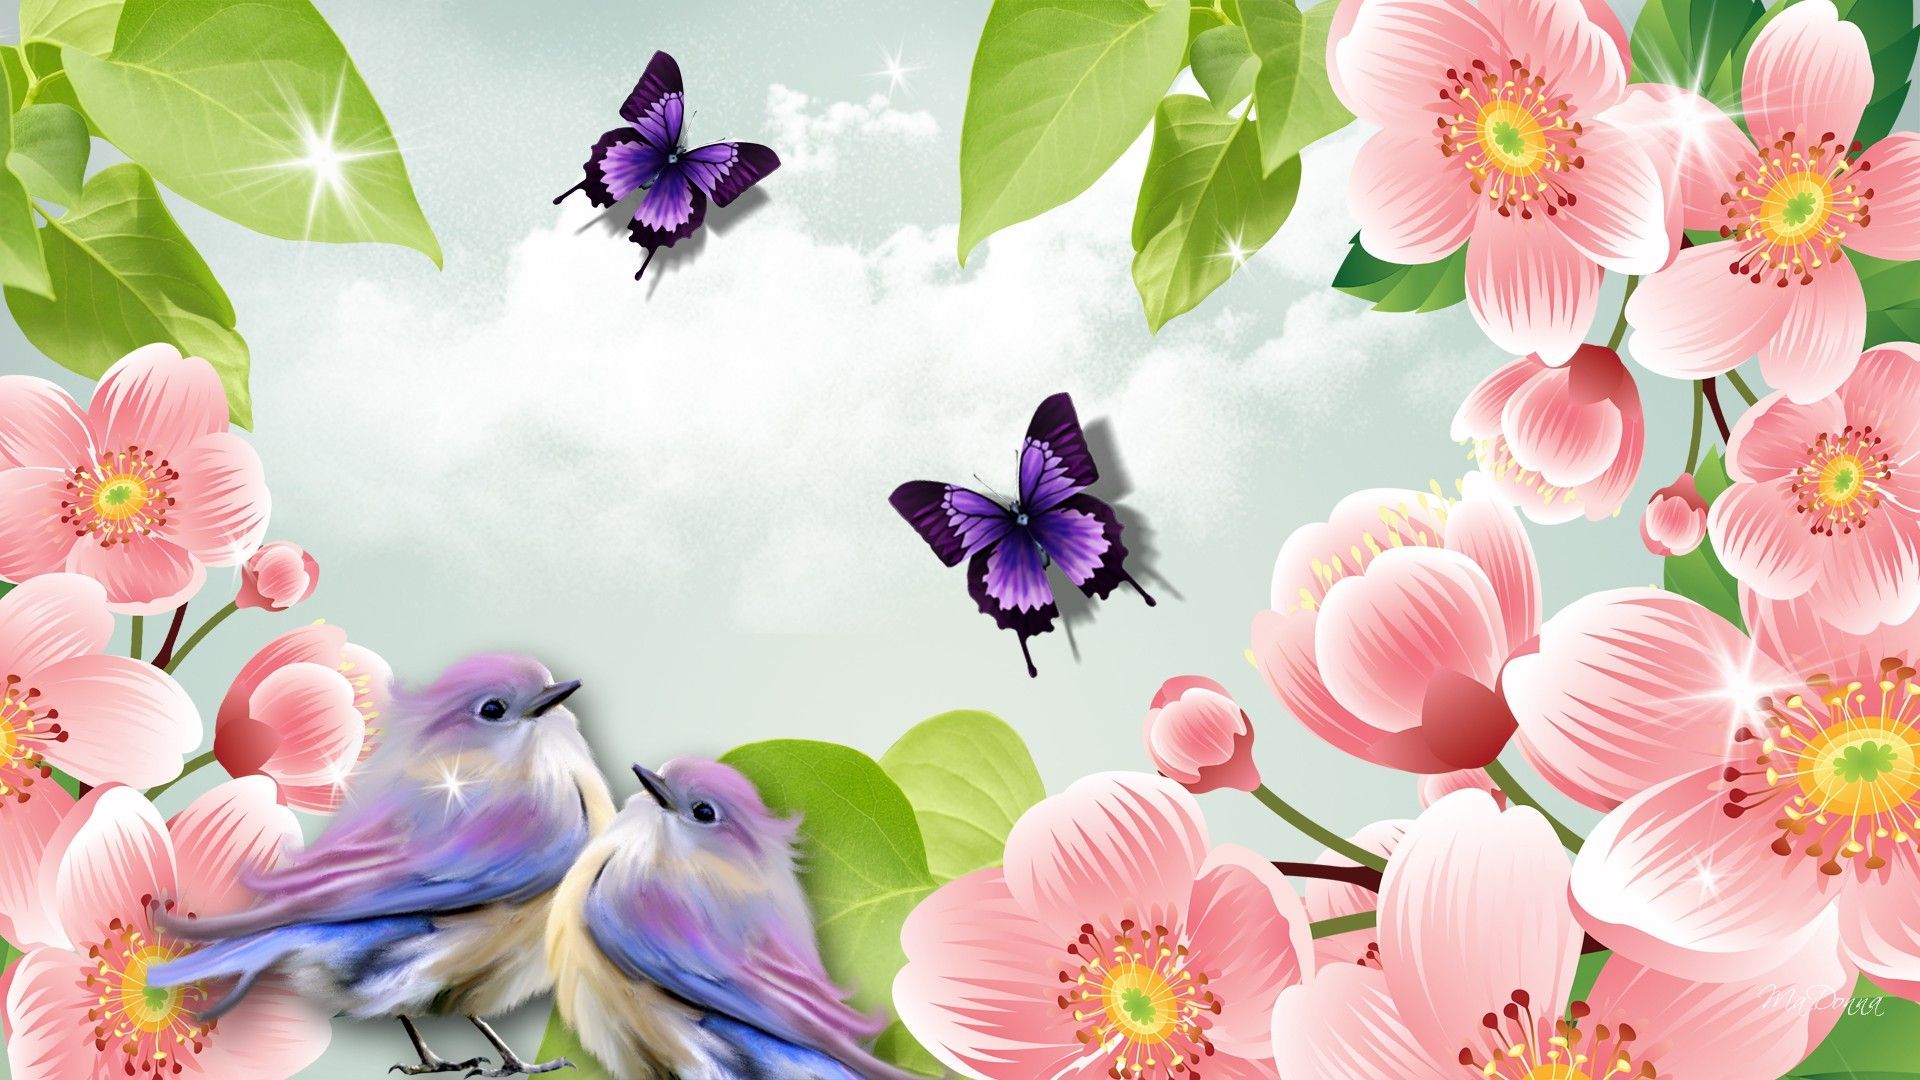 background-pictures-spring-hd-wallpaper.jpg